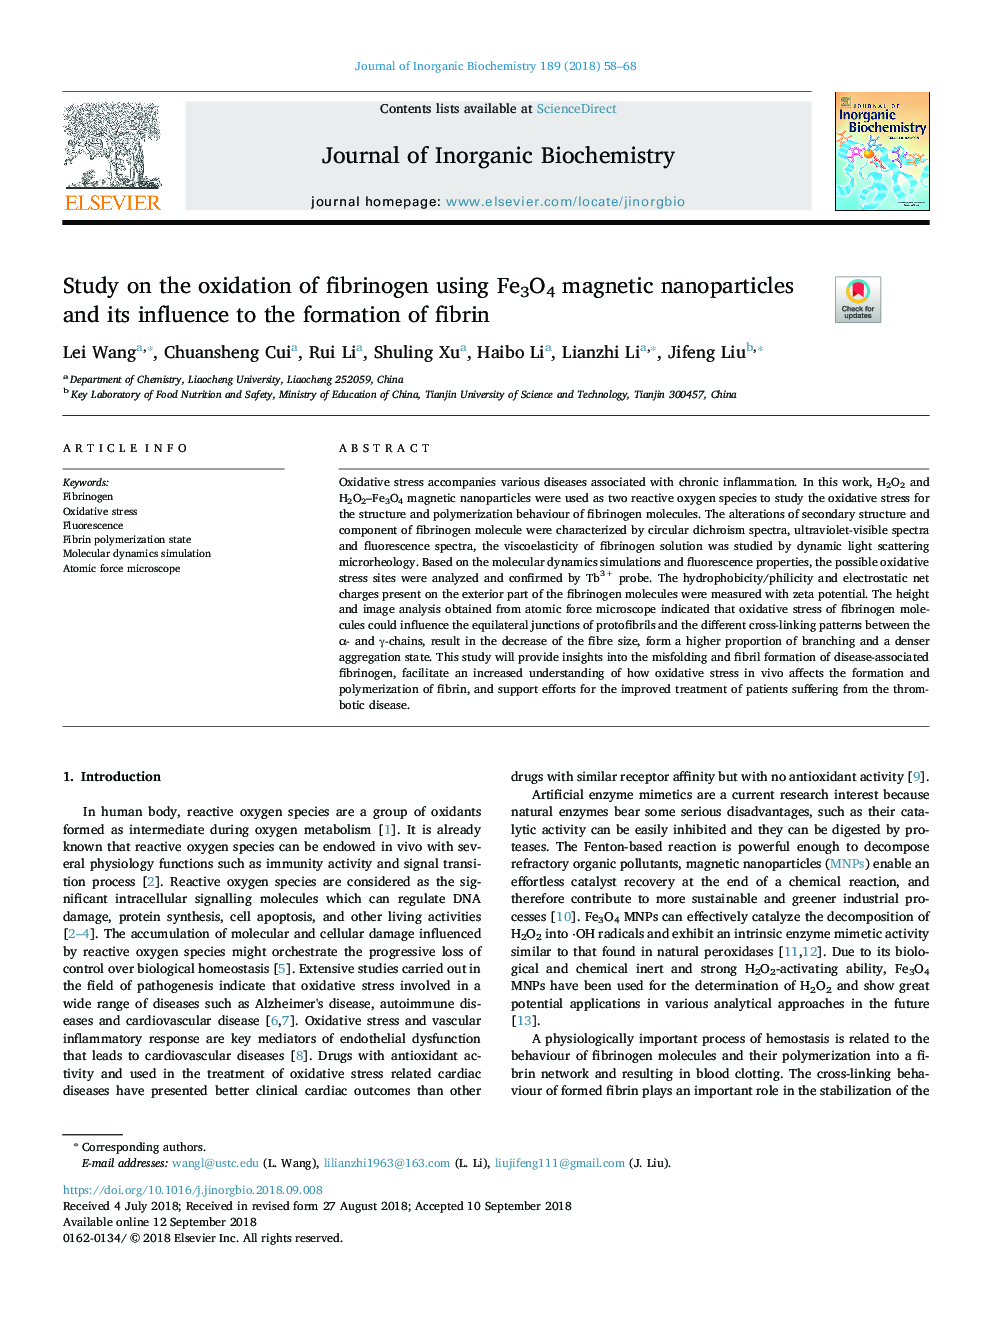 Study on the oxidation of fibrinogen using Fe3O4 magnetic nanoparticles and its influence to the formation of fibrin